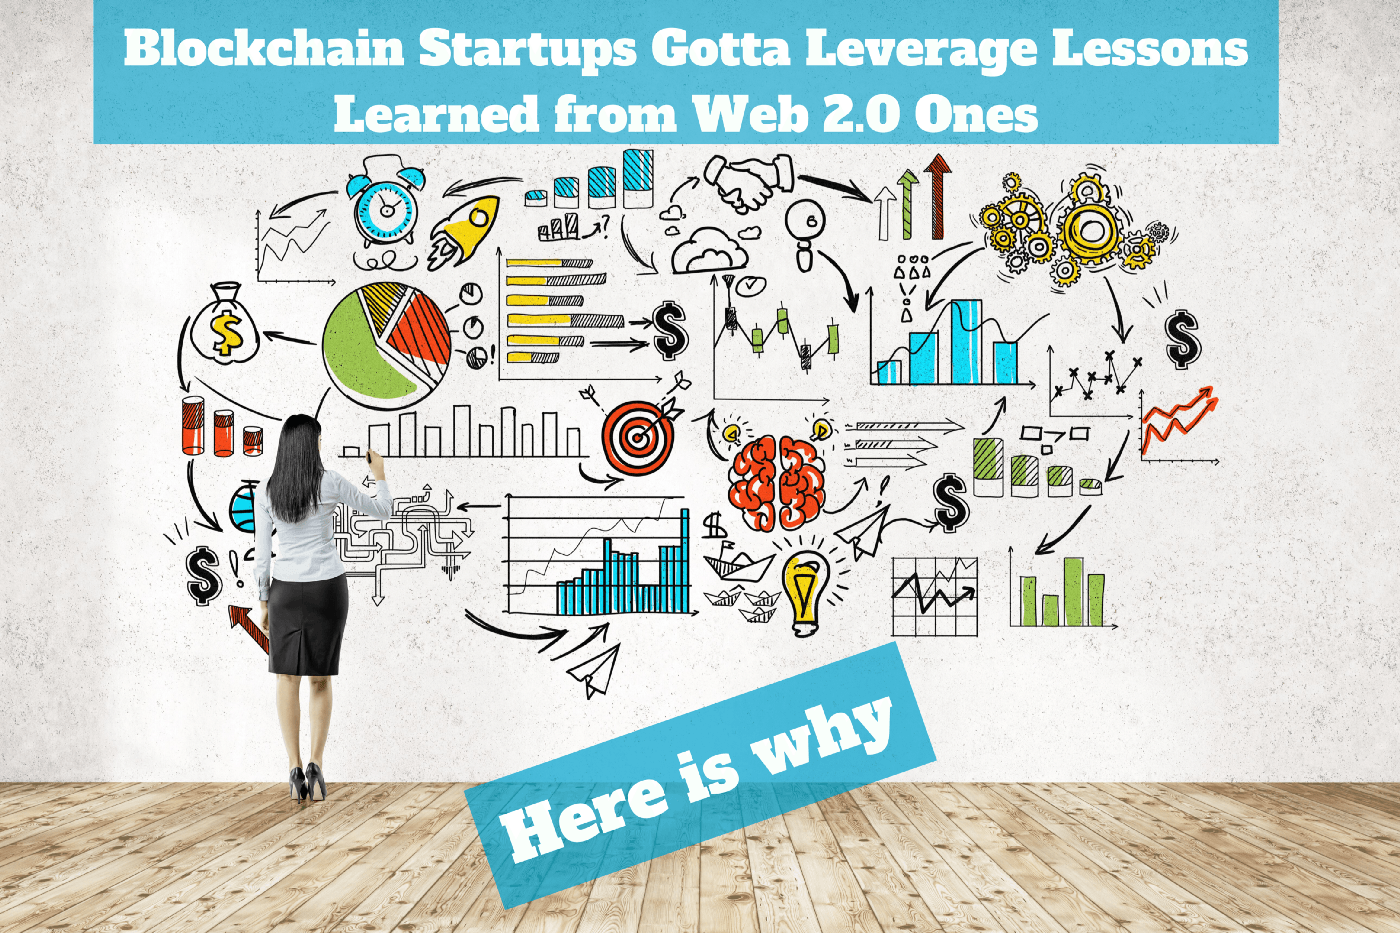 Blockchain Startups Gotta Leverage Lessons Learned fromWeb 2.0 Ones. Here Is Why.